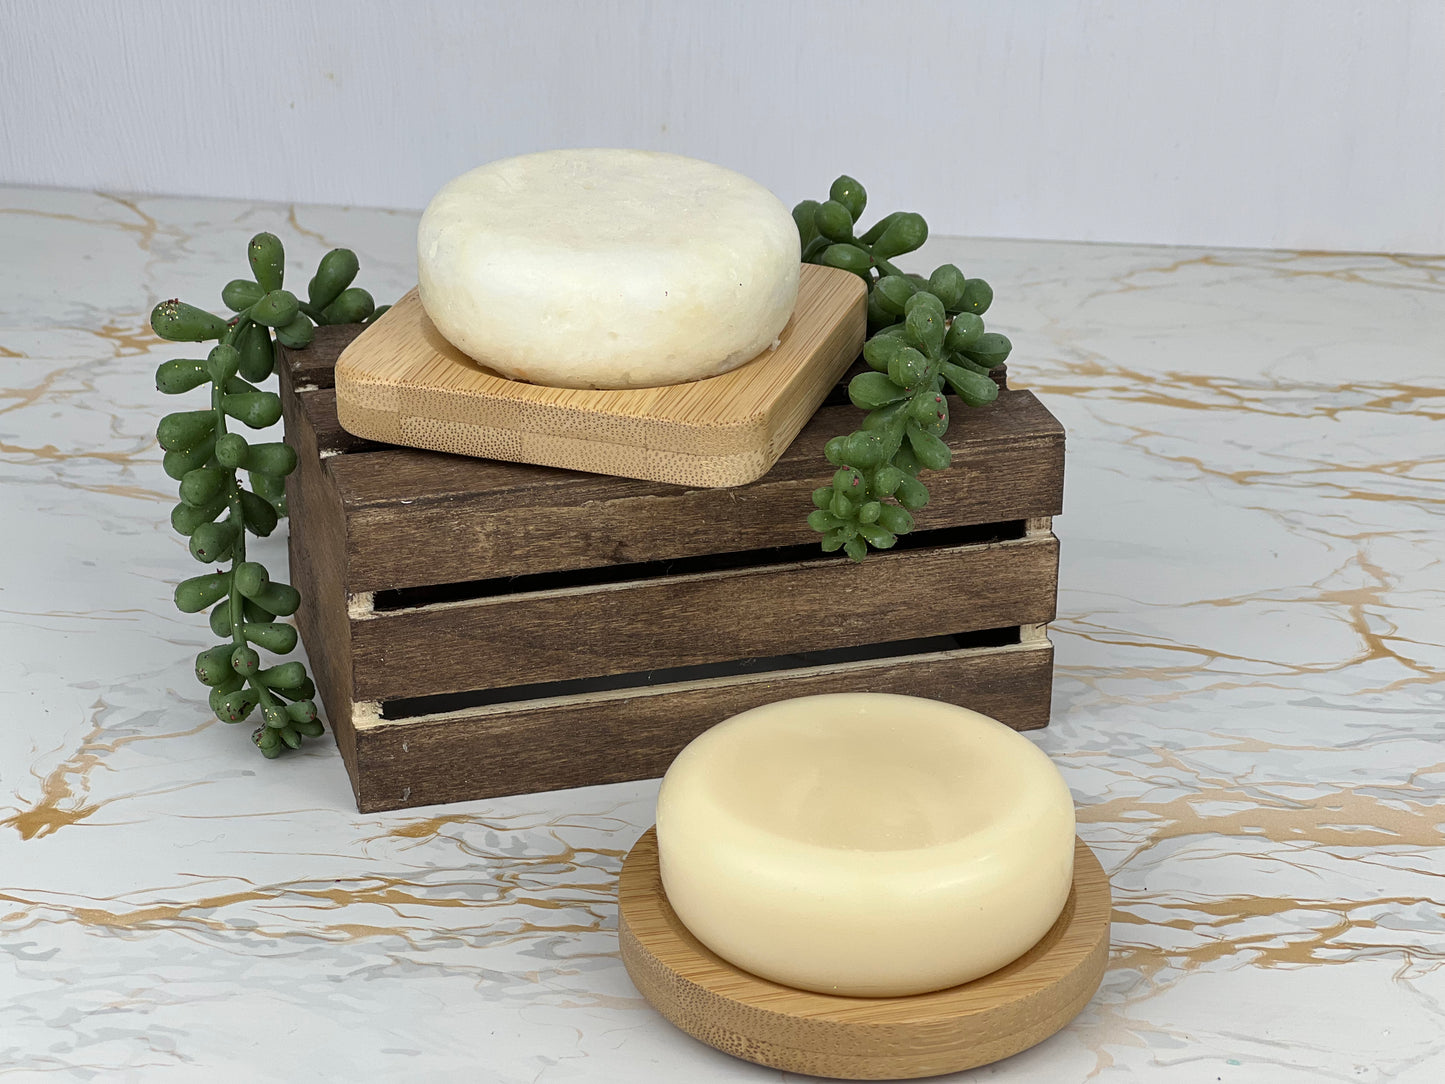 Coconut Bliss Shampoo and Conditioner Bars